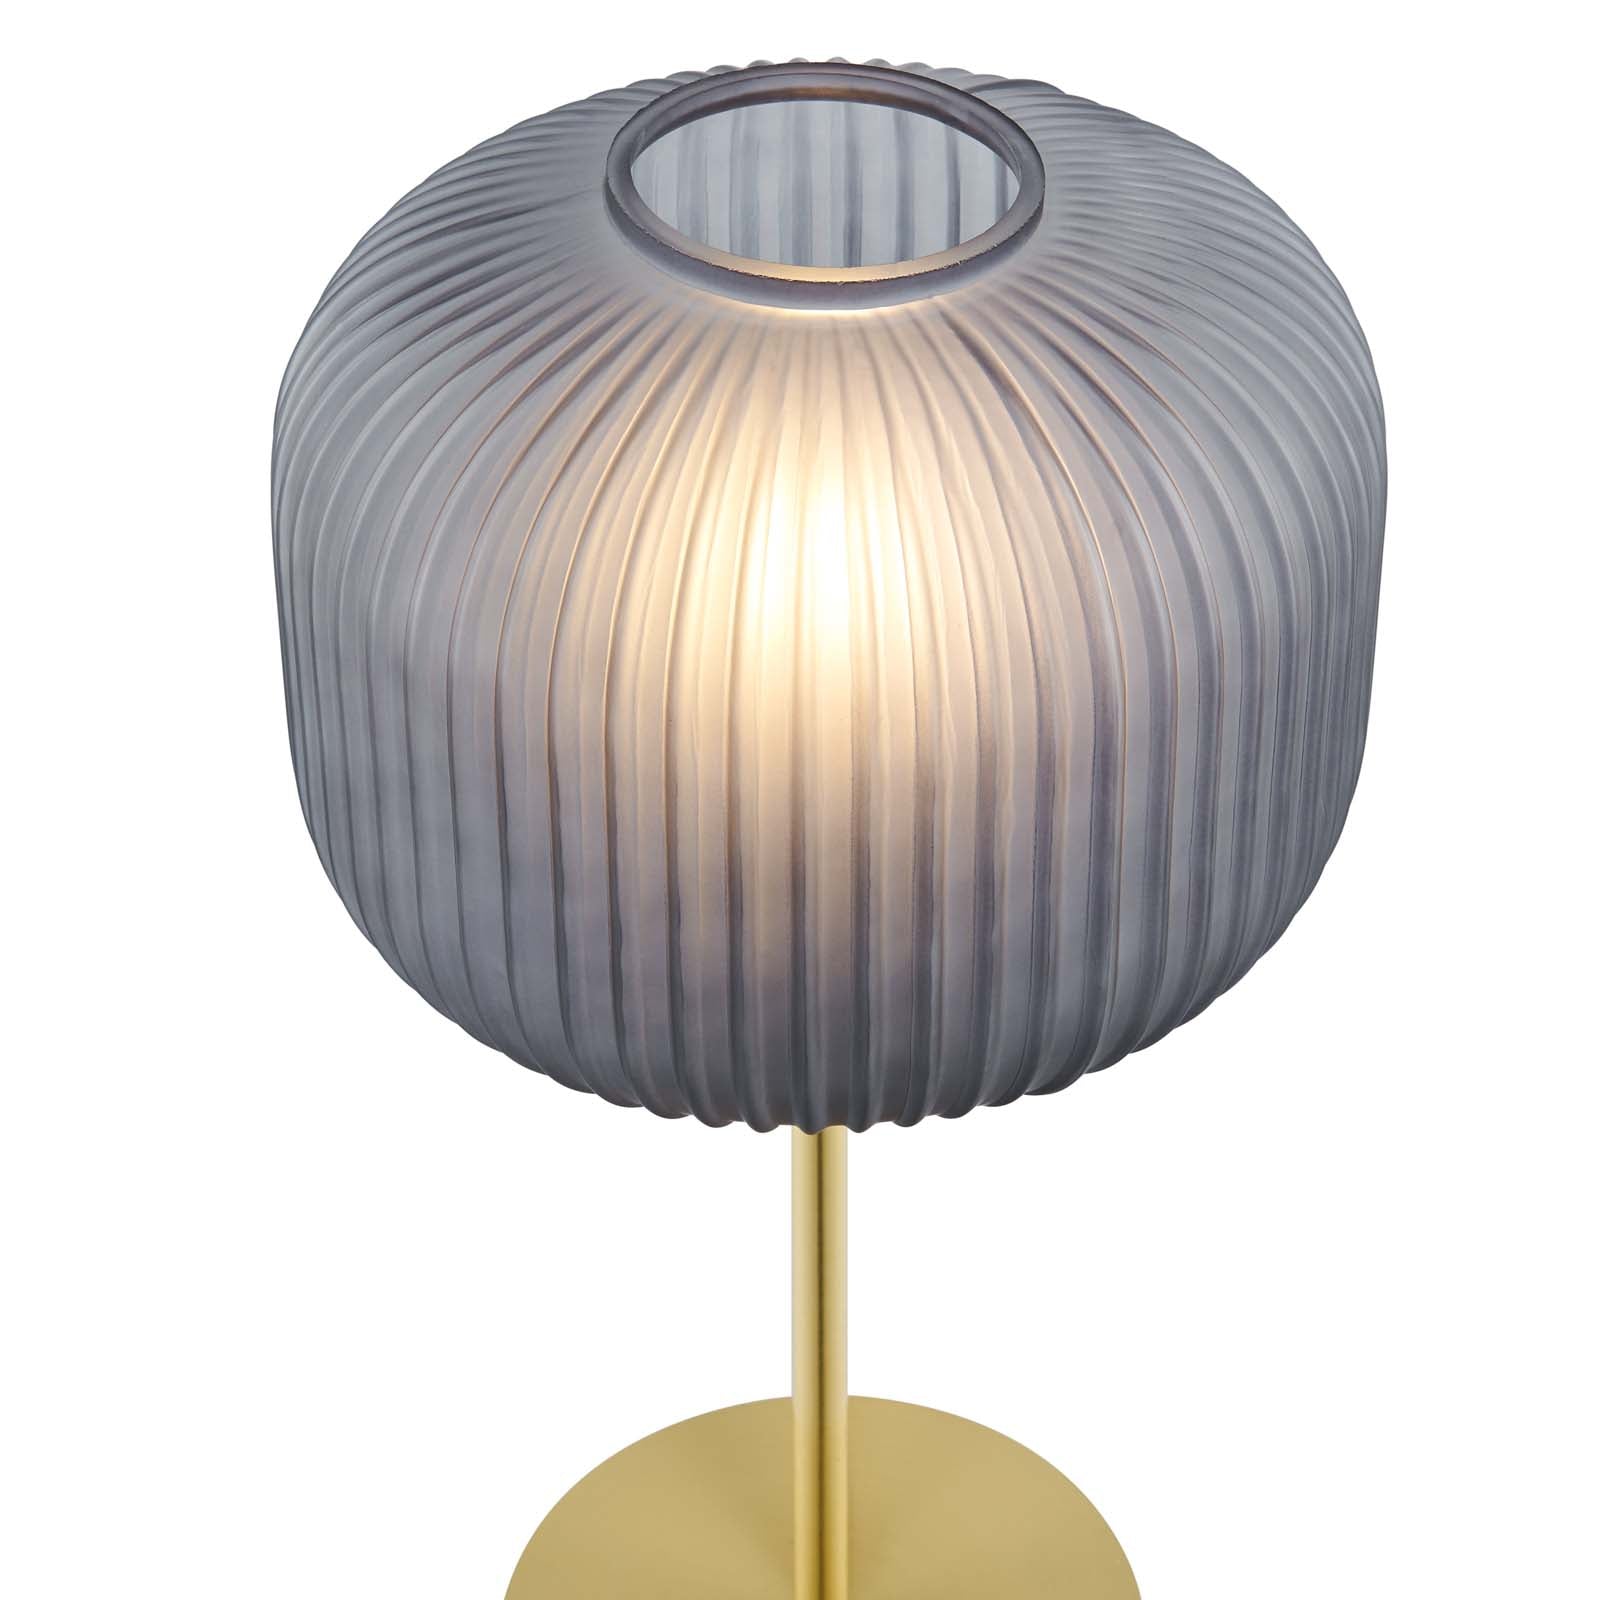 Modway Table Lamps - Reprise Glass Sphere Glass And Metal Table Lamp Black Satin Brass